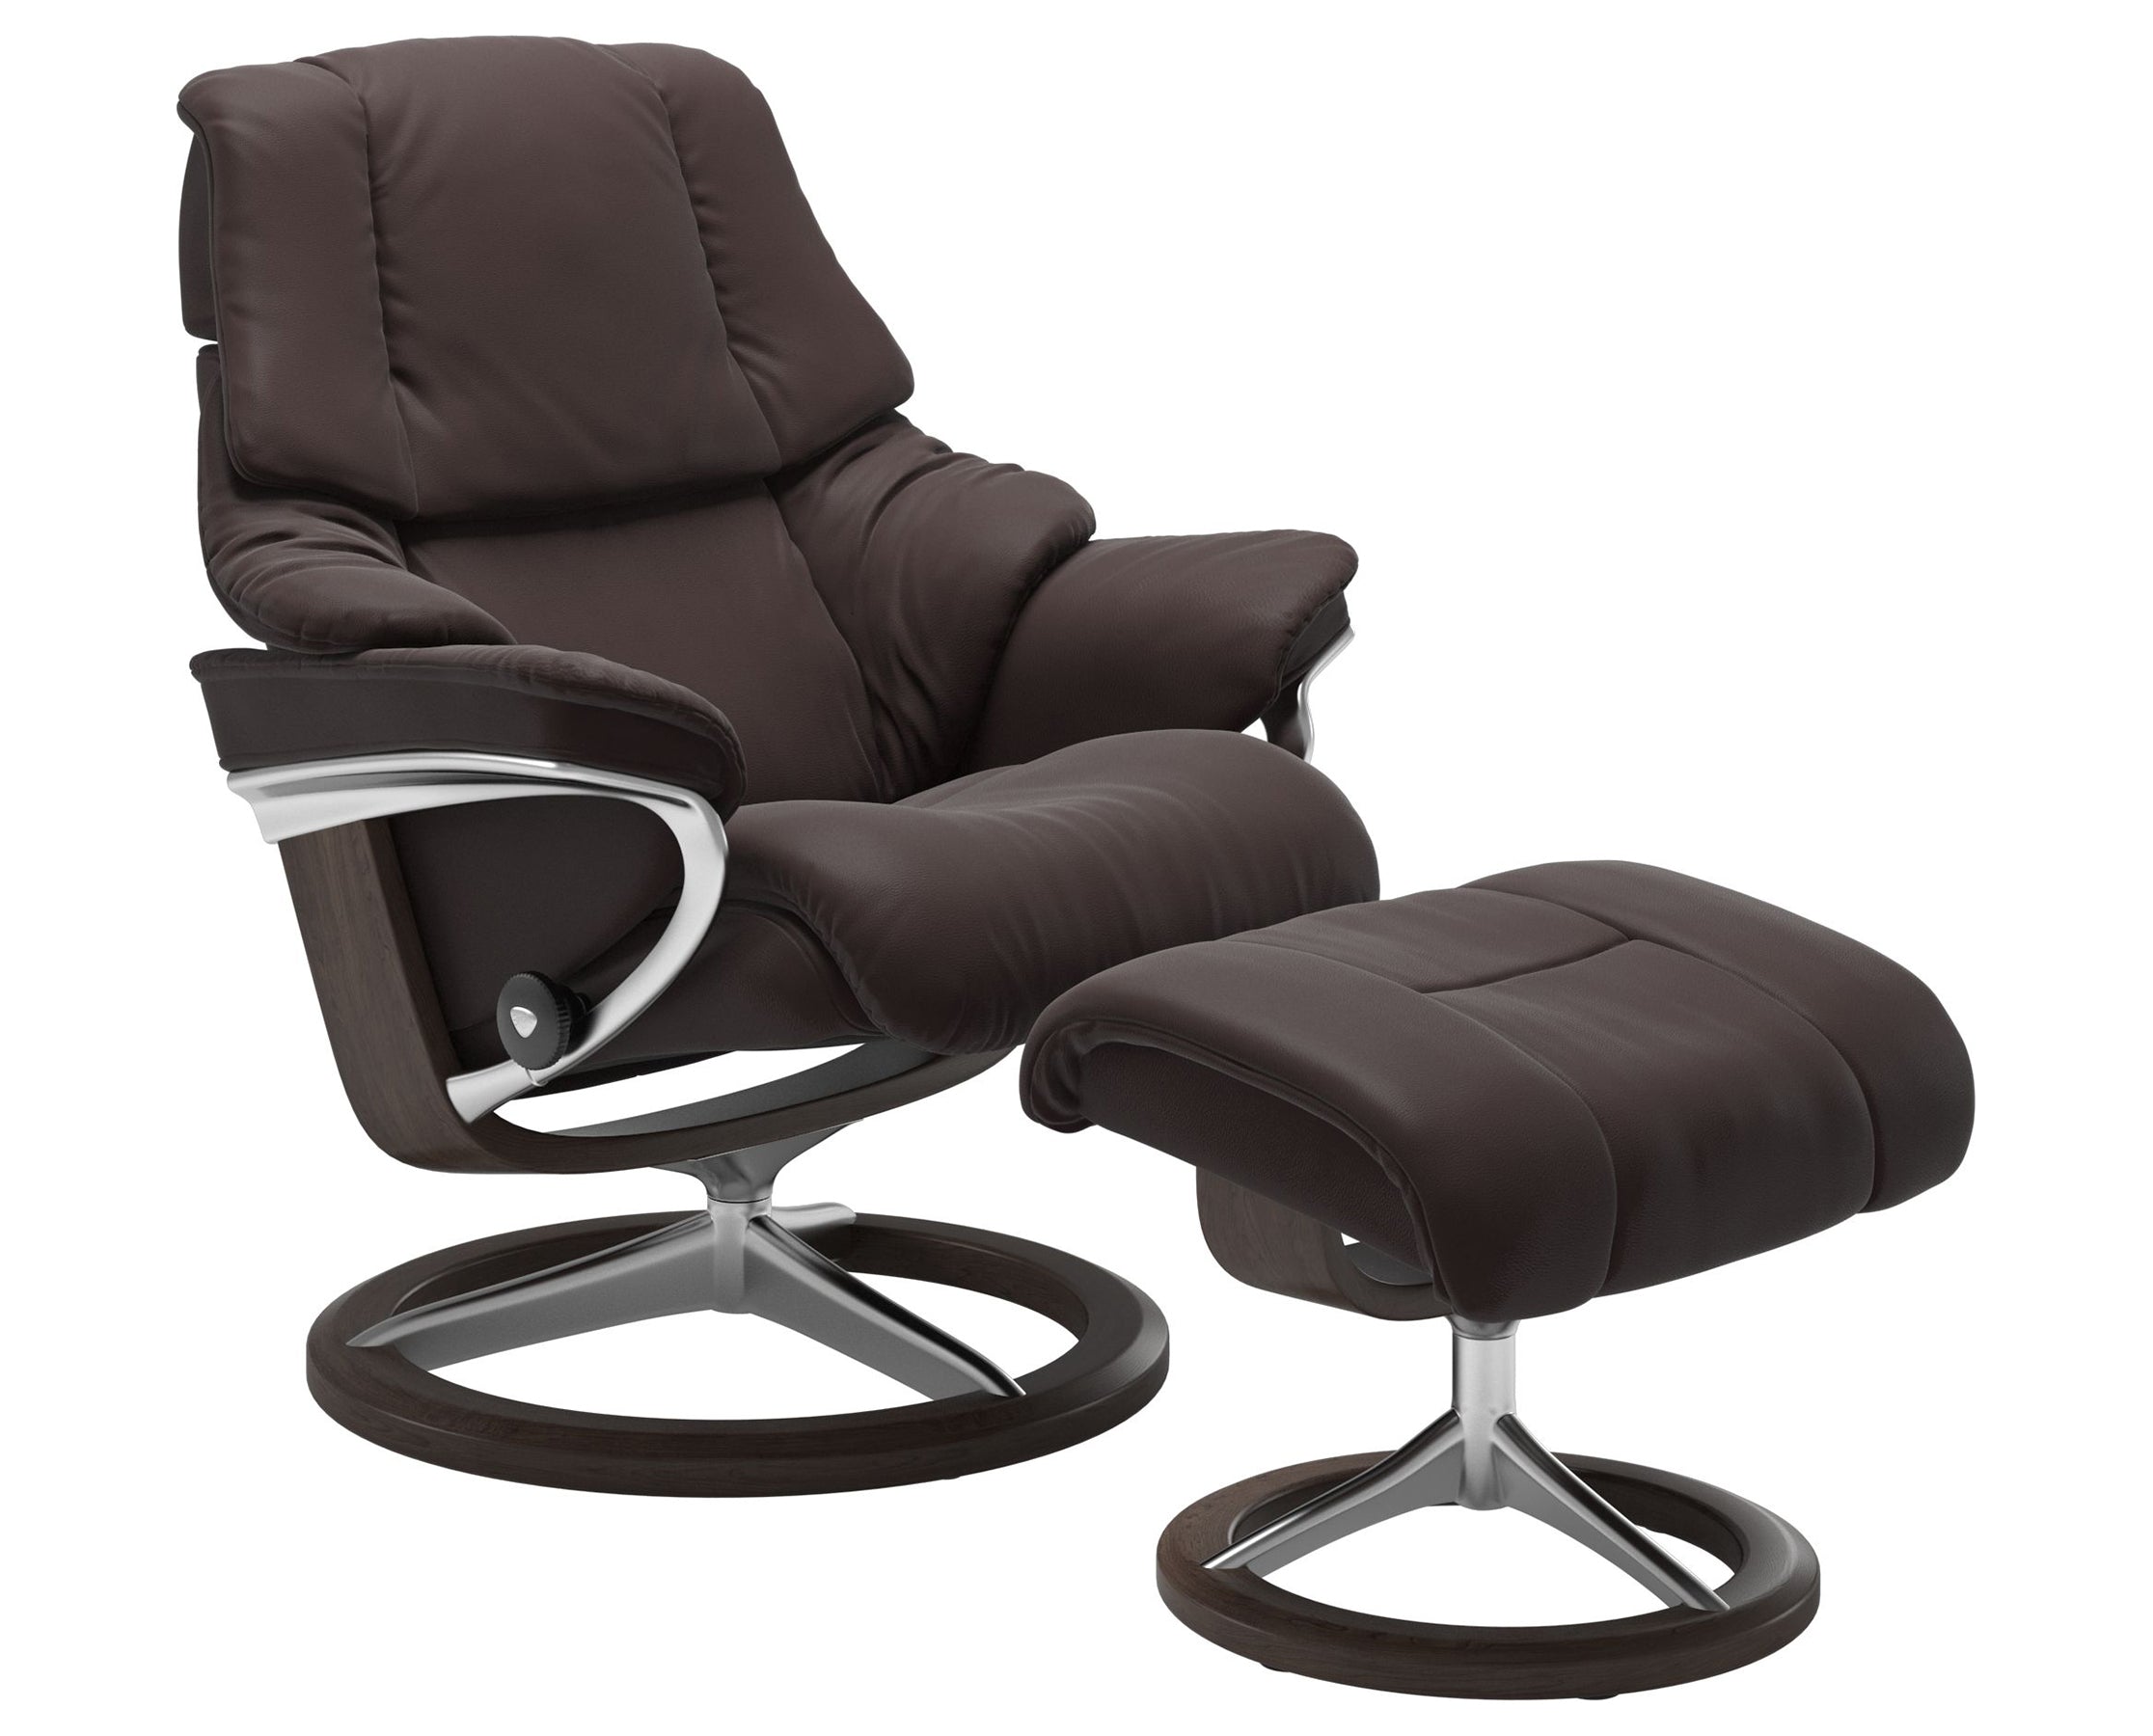 Paloma Leather Chocolate S/M/L and Wenge Base | Stressless Reno Signature Recliner | Valley Ridge Furniture